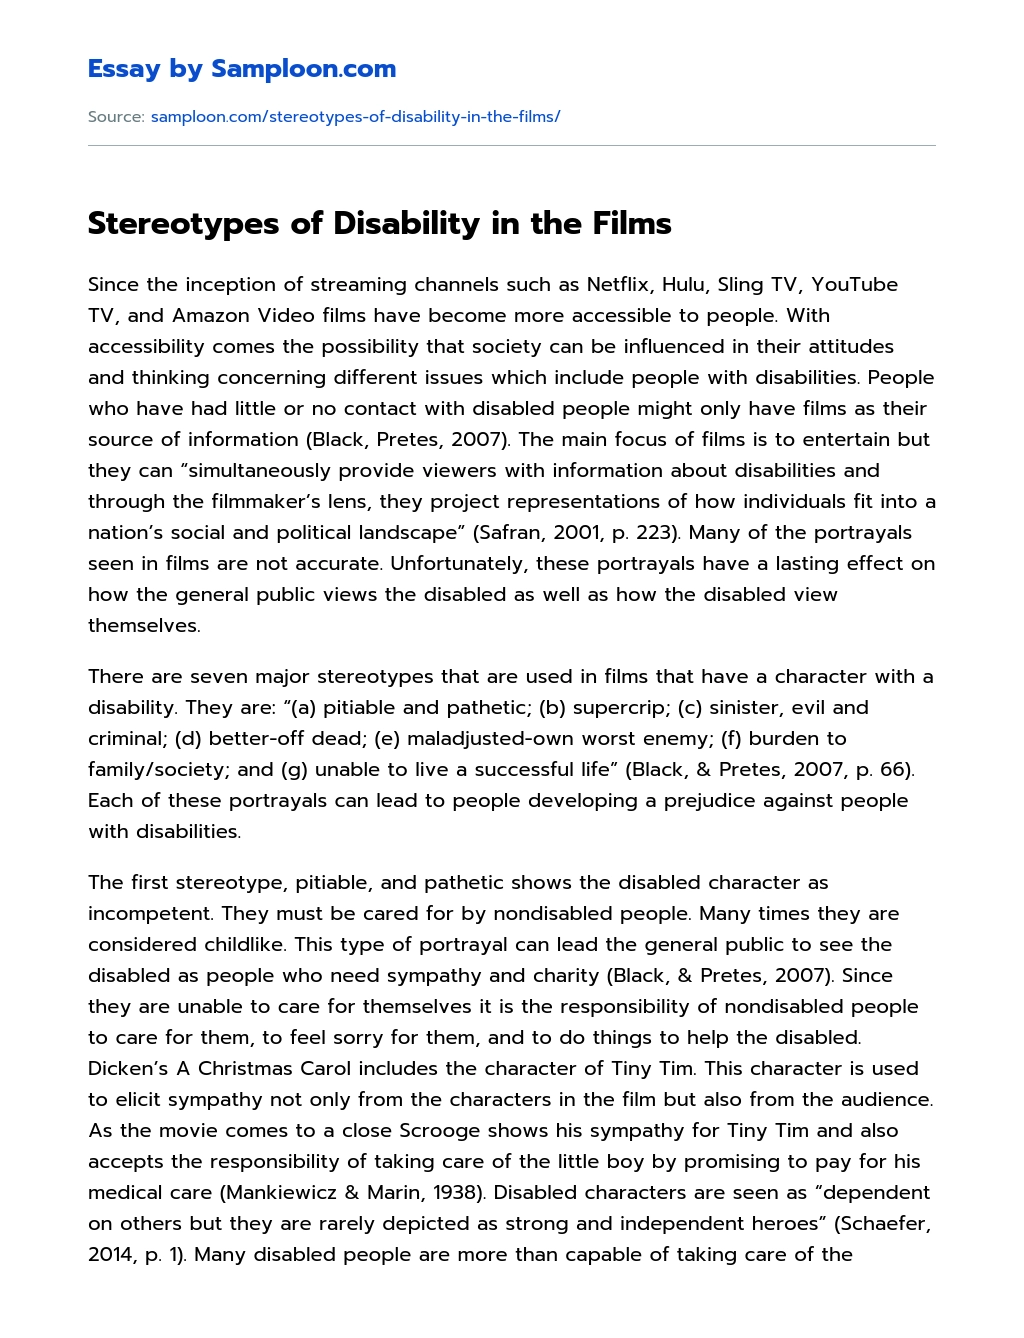 Stereotypes of Disability in the Films essay